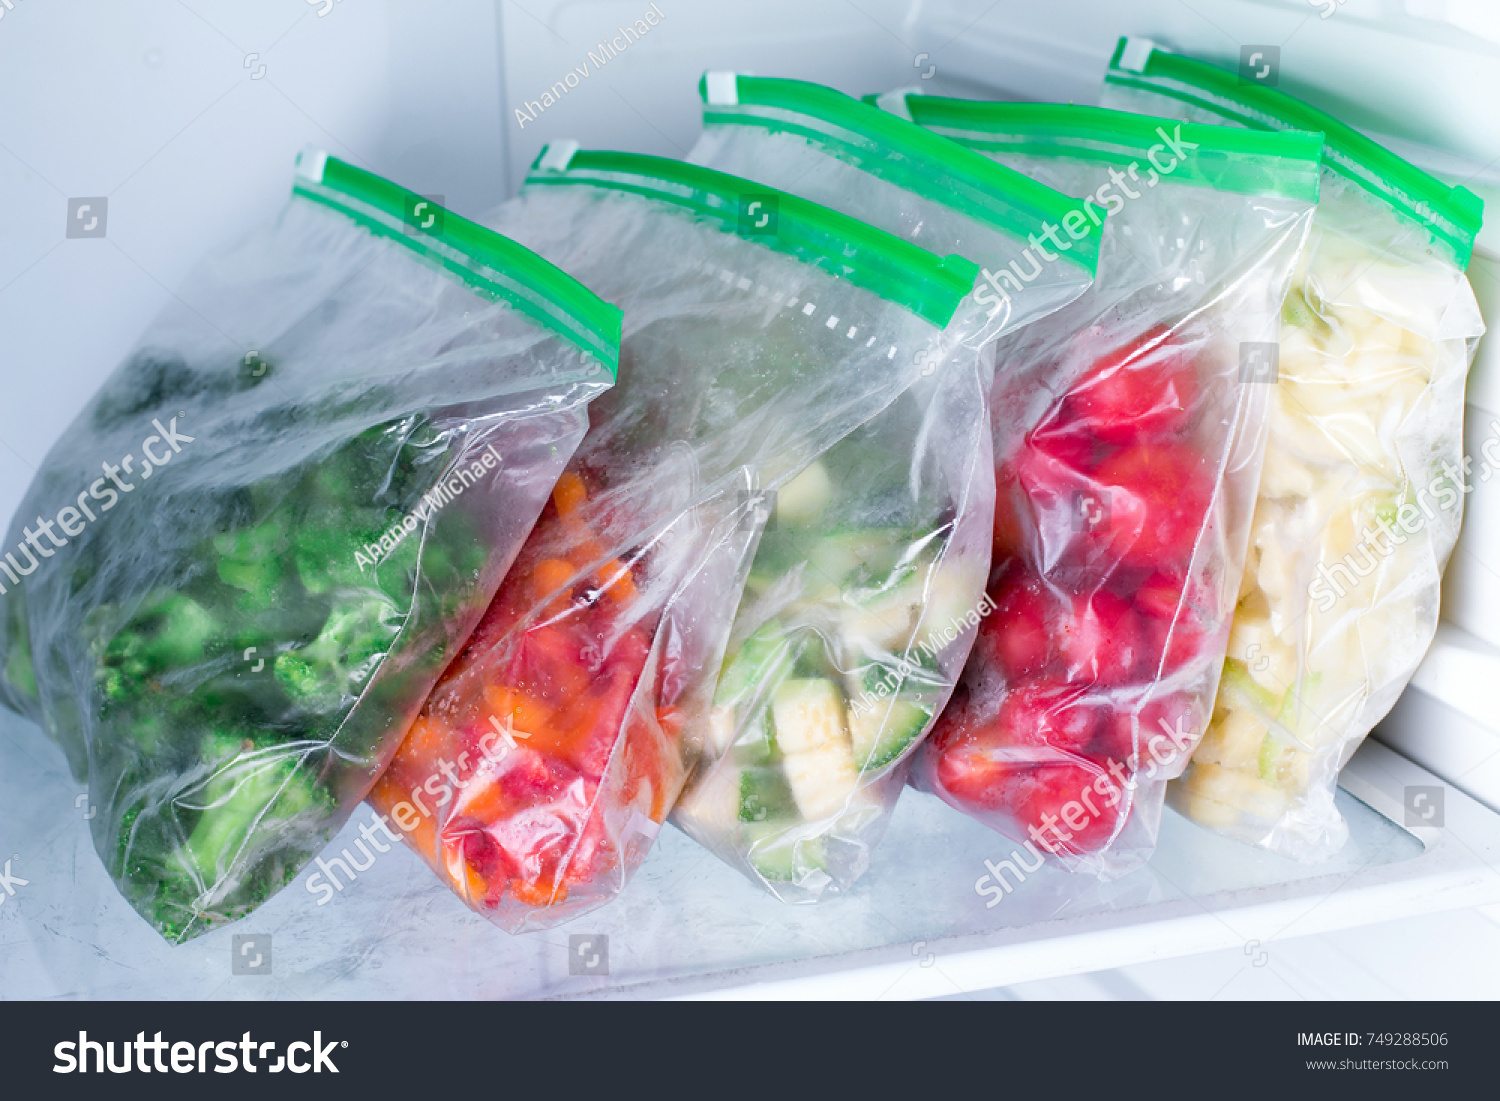 Bags with frozen vegetables in refrigerator #749288506